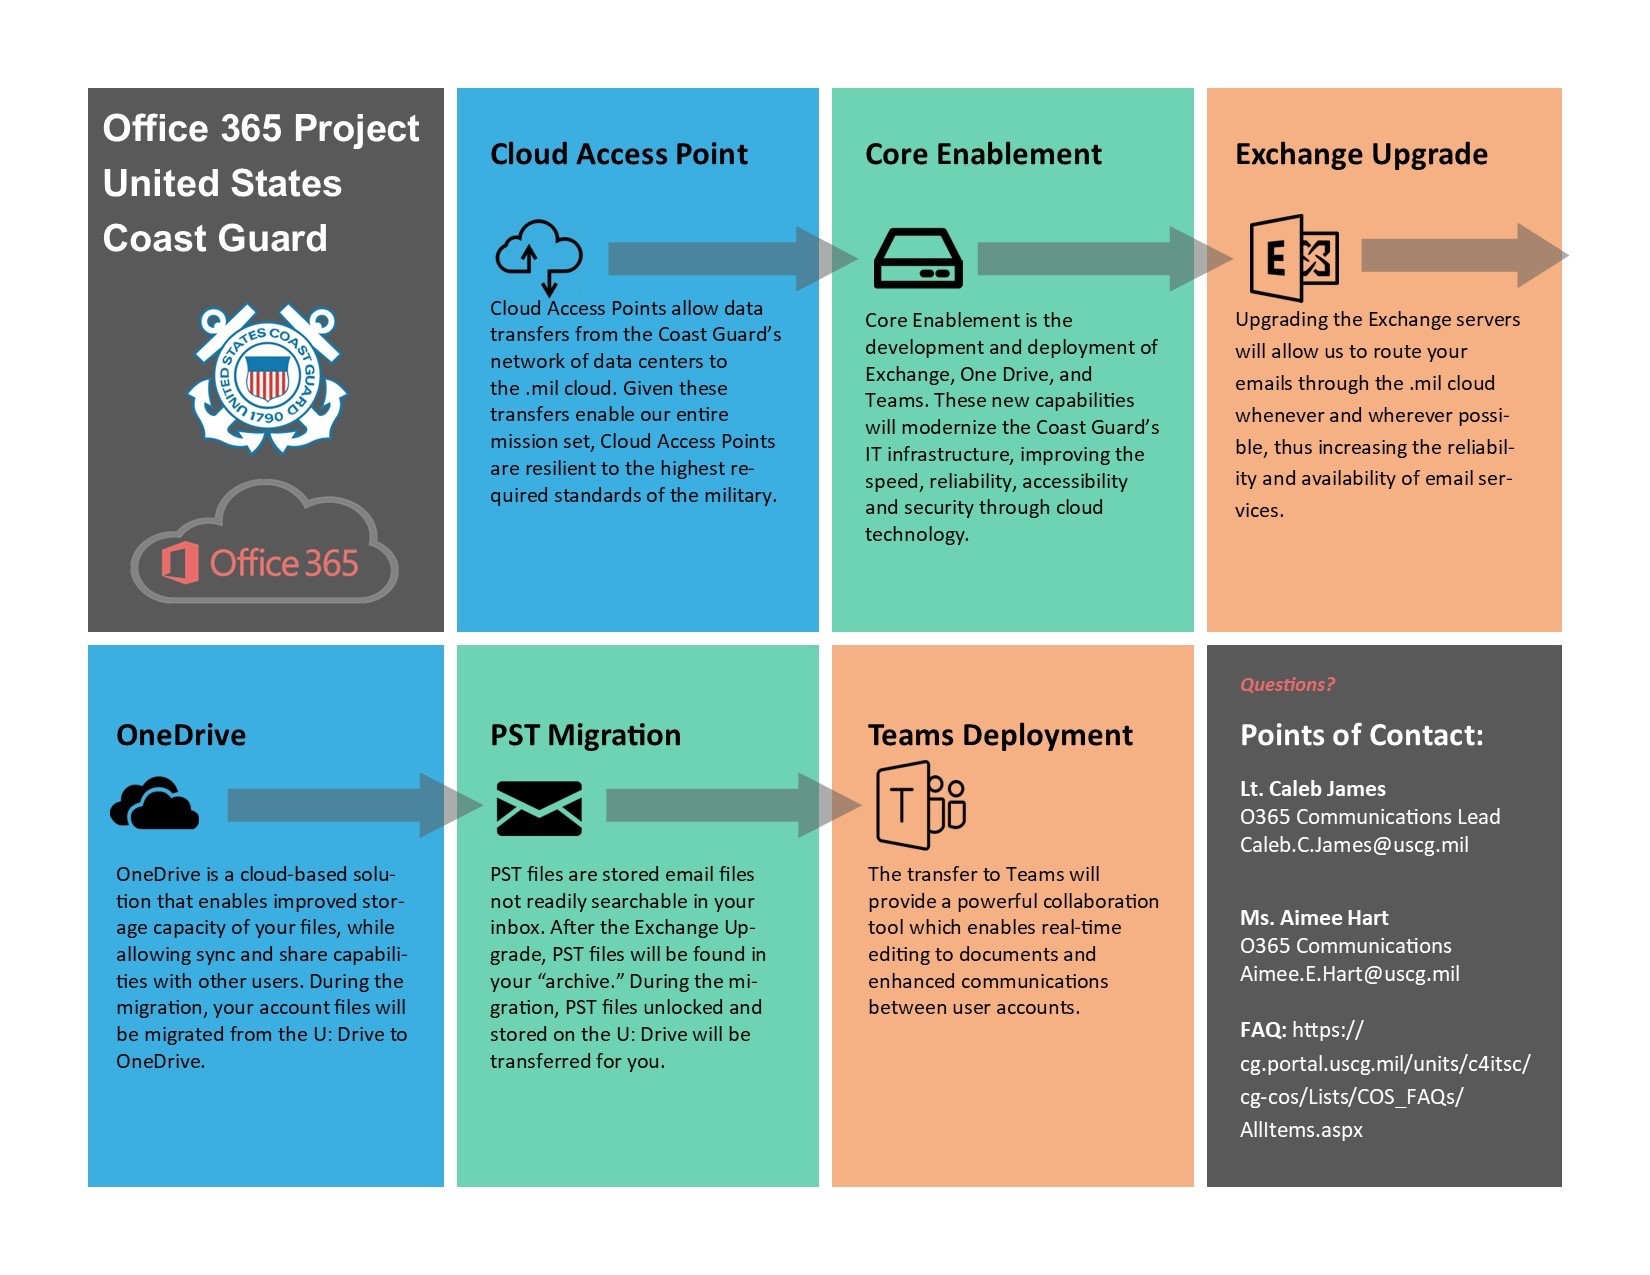 This flow chart, posted on the Cloud Office Solutions Office 365 Project page, offers a brief overview of the transition plan to upgrade Coast Guard to Microsoft 365. For questions regarding this process, please see the points of contact above. 